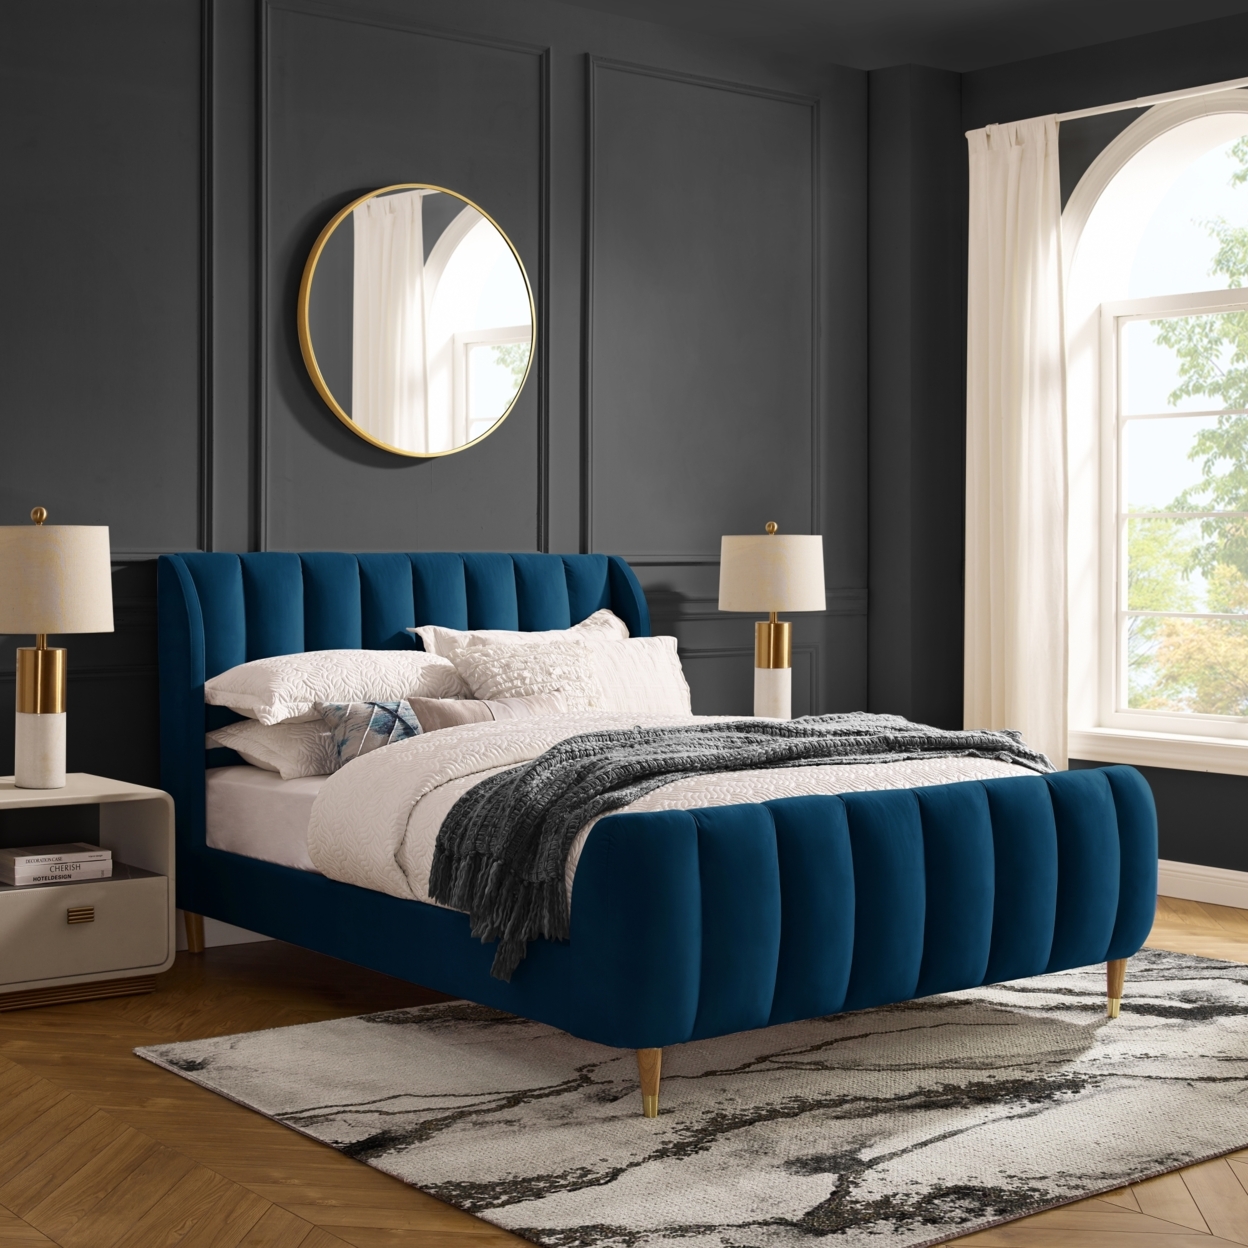 Sana Bed-Upholstered-Channel Tufted-Slats Included - Navy, Queen